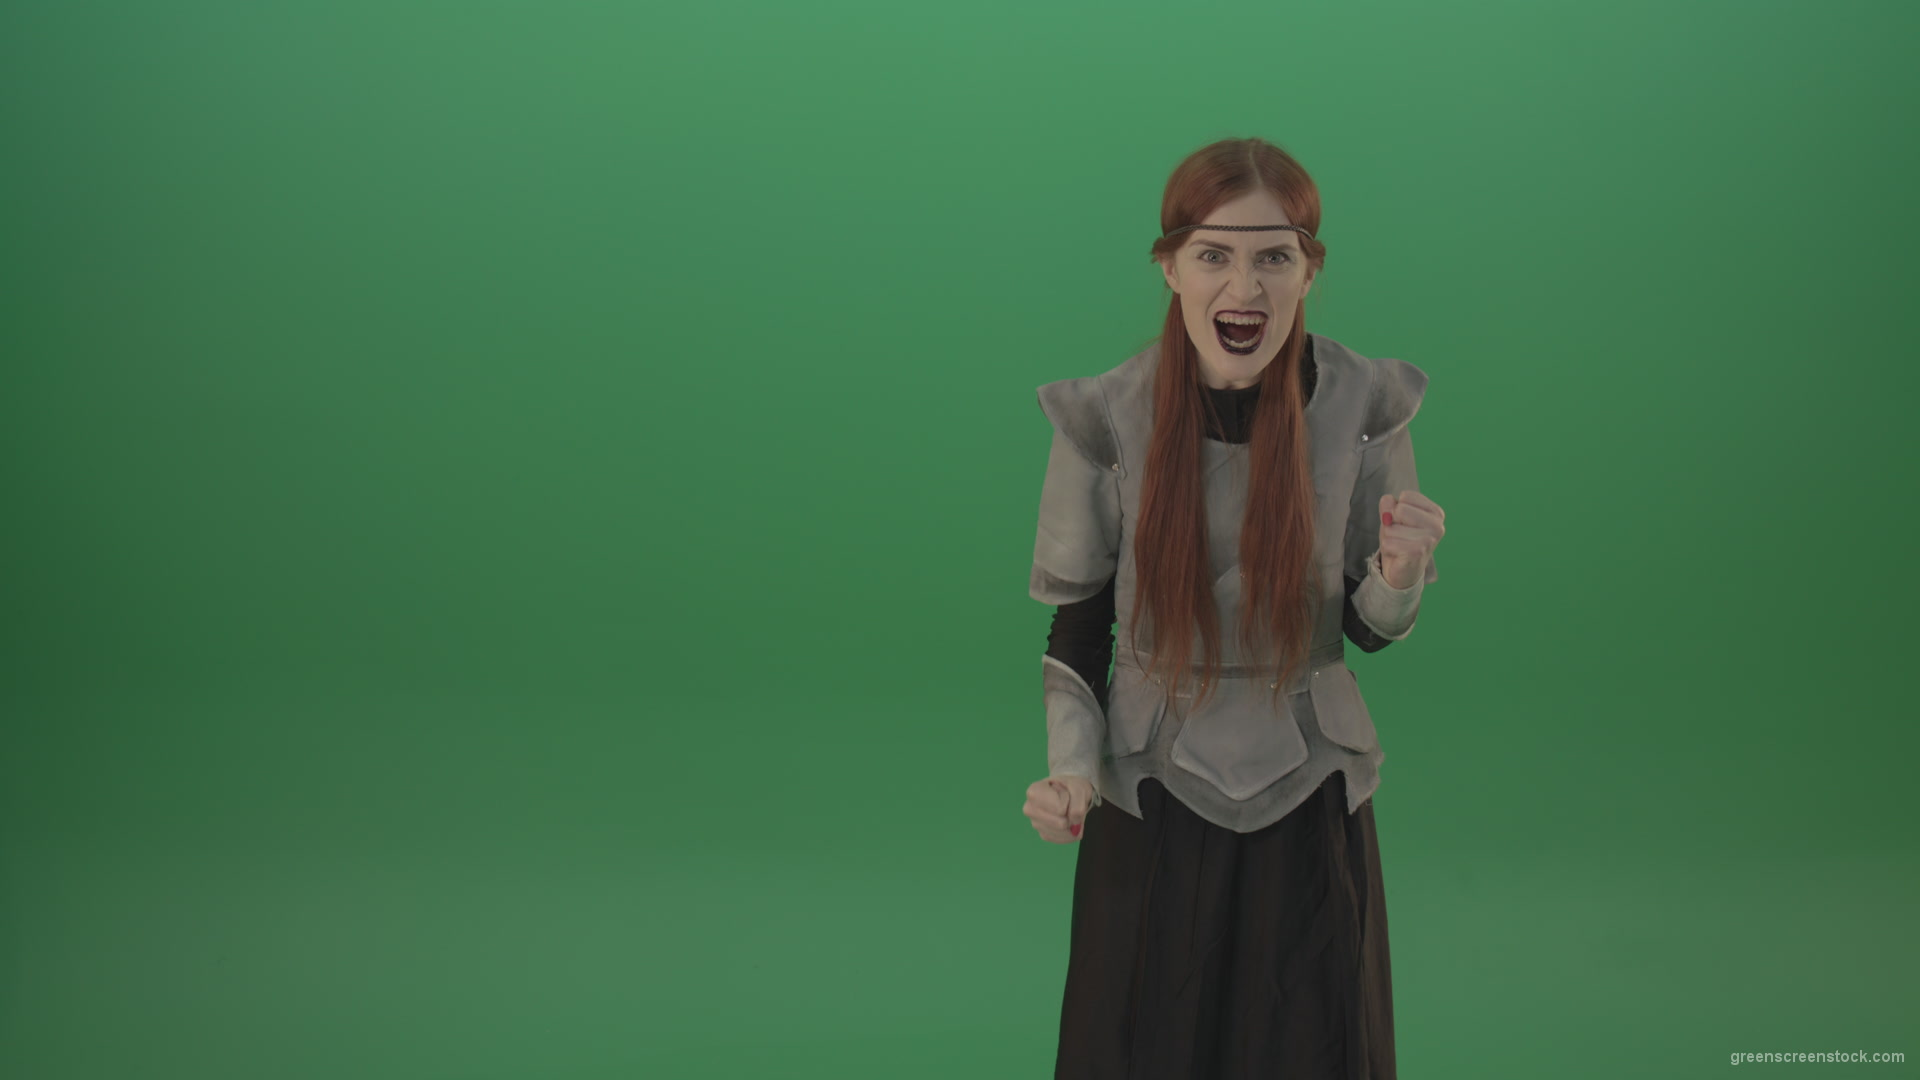 Witch-girl-watched-and-screamed-at-the-camera-with-green-eyes-on-a-green-background_005 Green Screen Stock